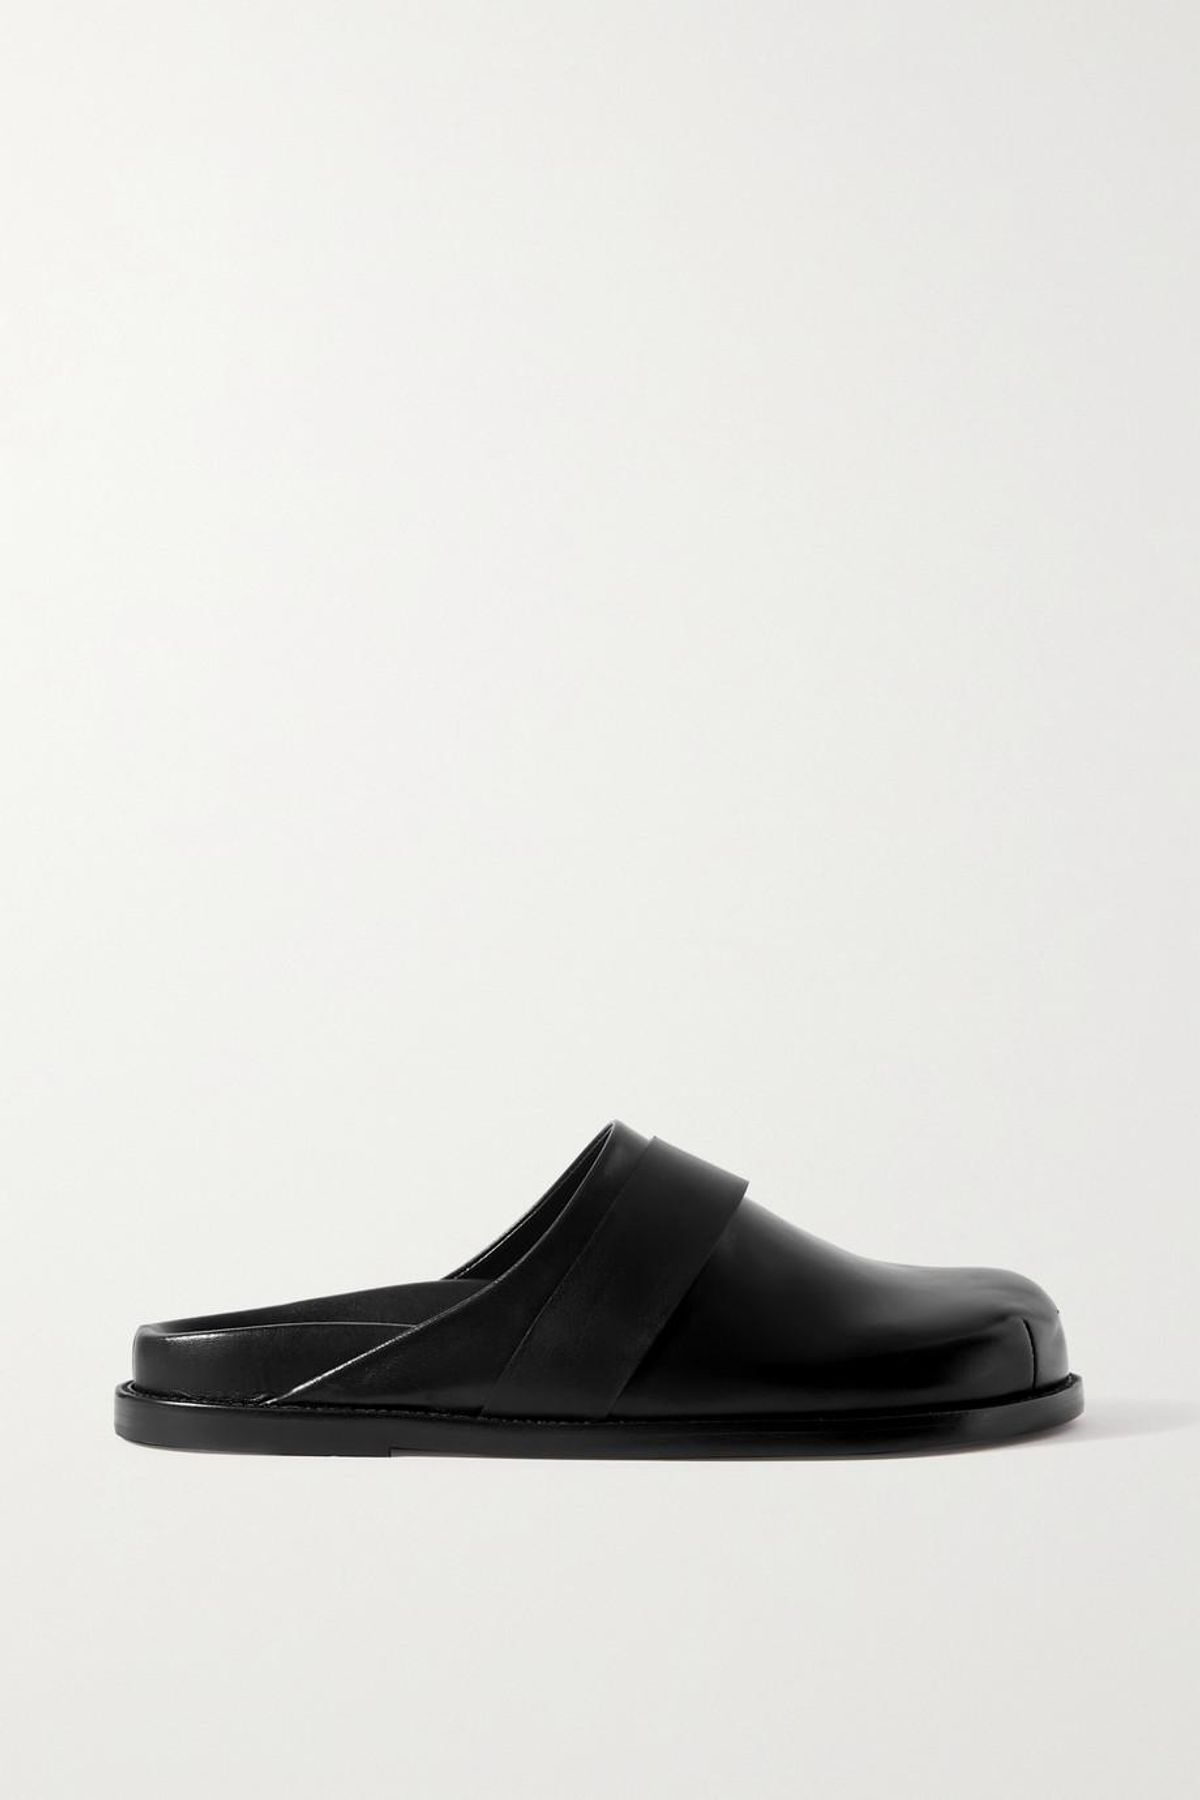 + Frankie Shop Leather Slippers